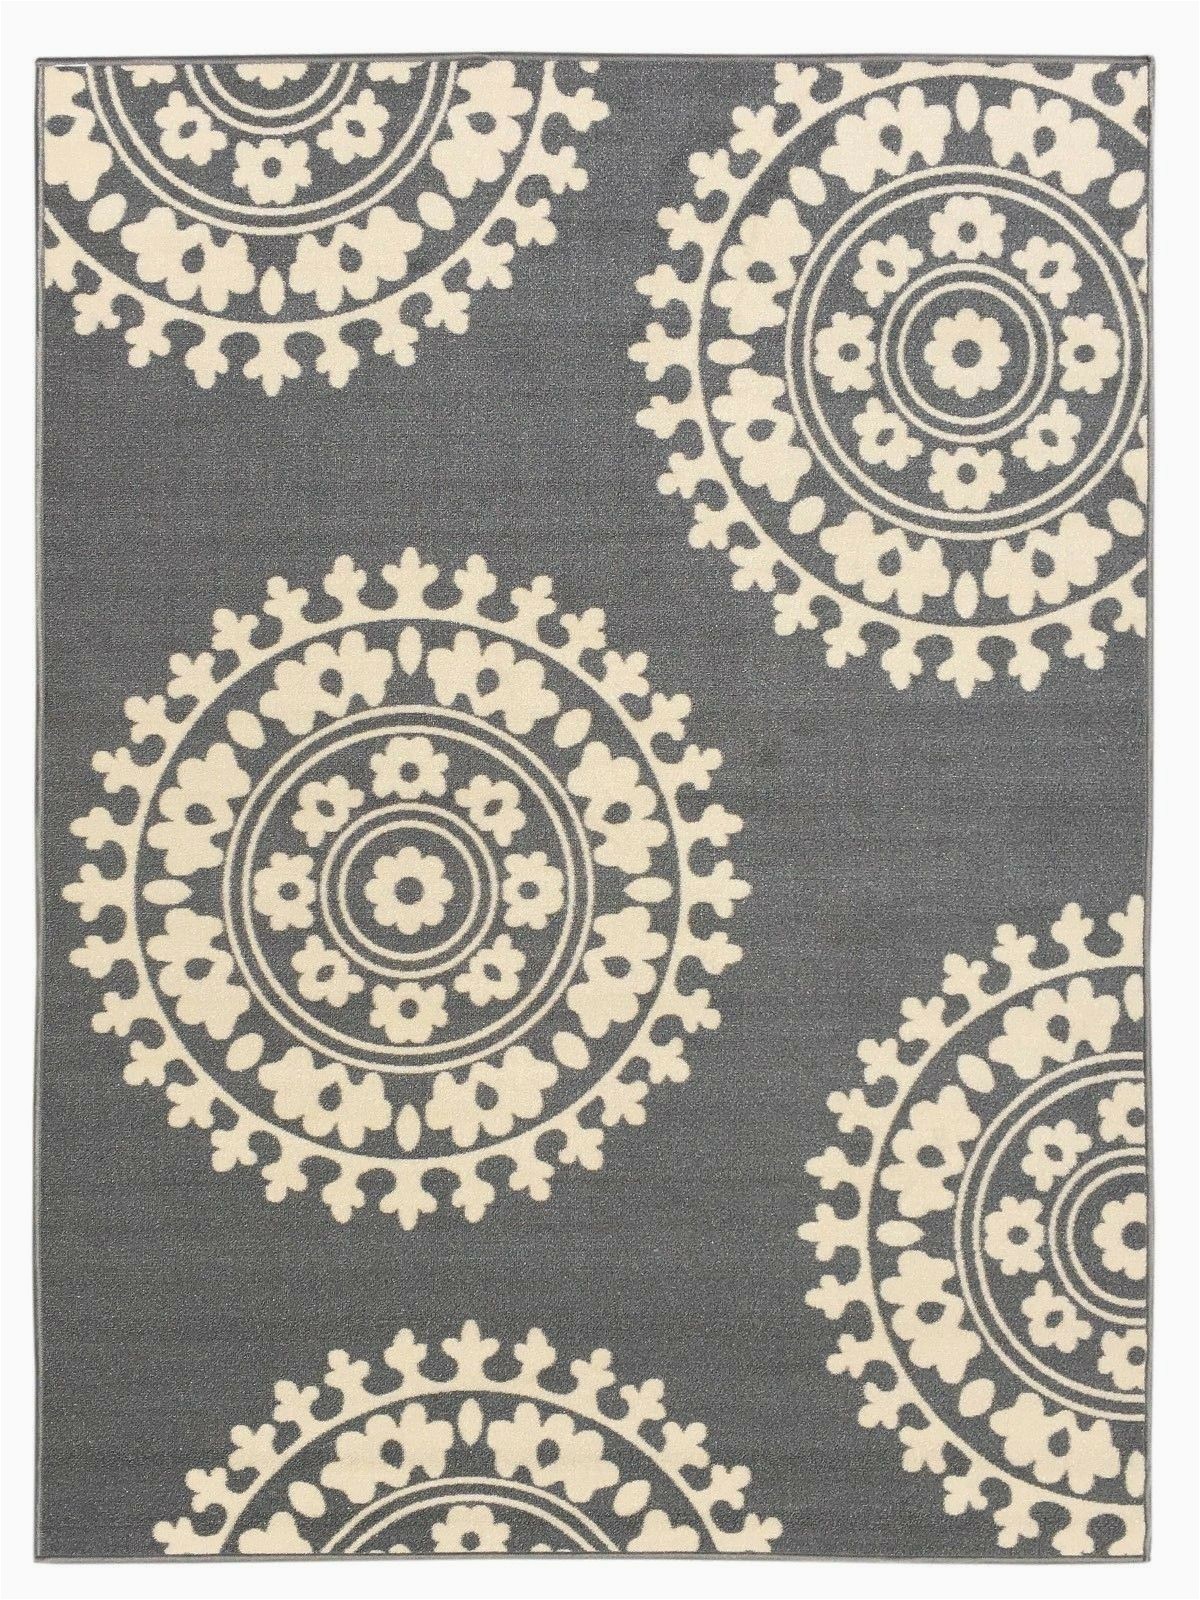 Area Rugs with Non Skid Backing Rubber Backed Non Skid Non Slip Gray Ivory Color Medallion Design area Rug